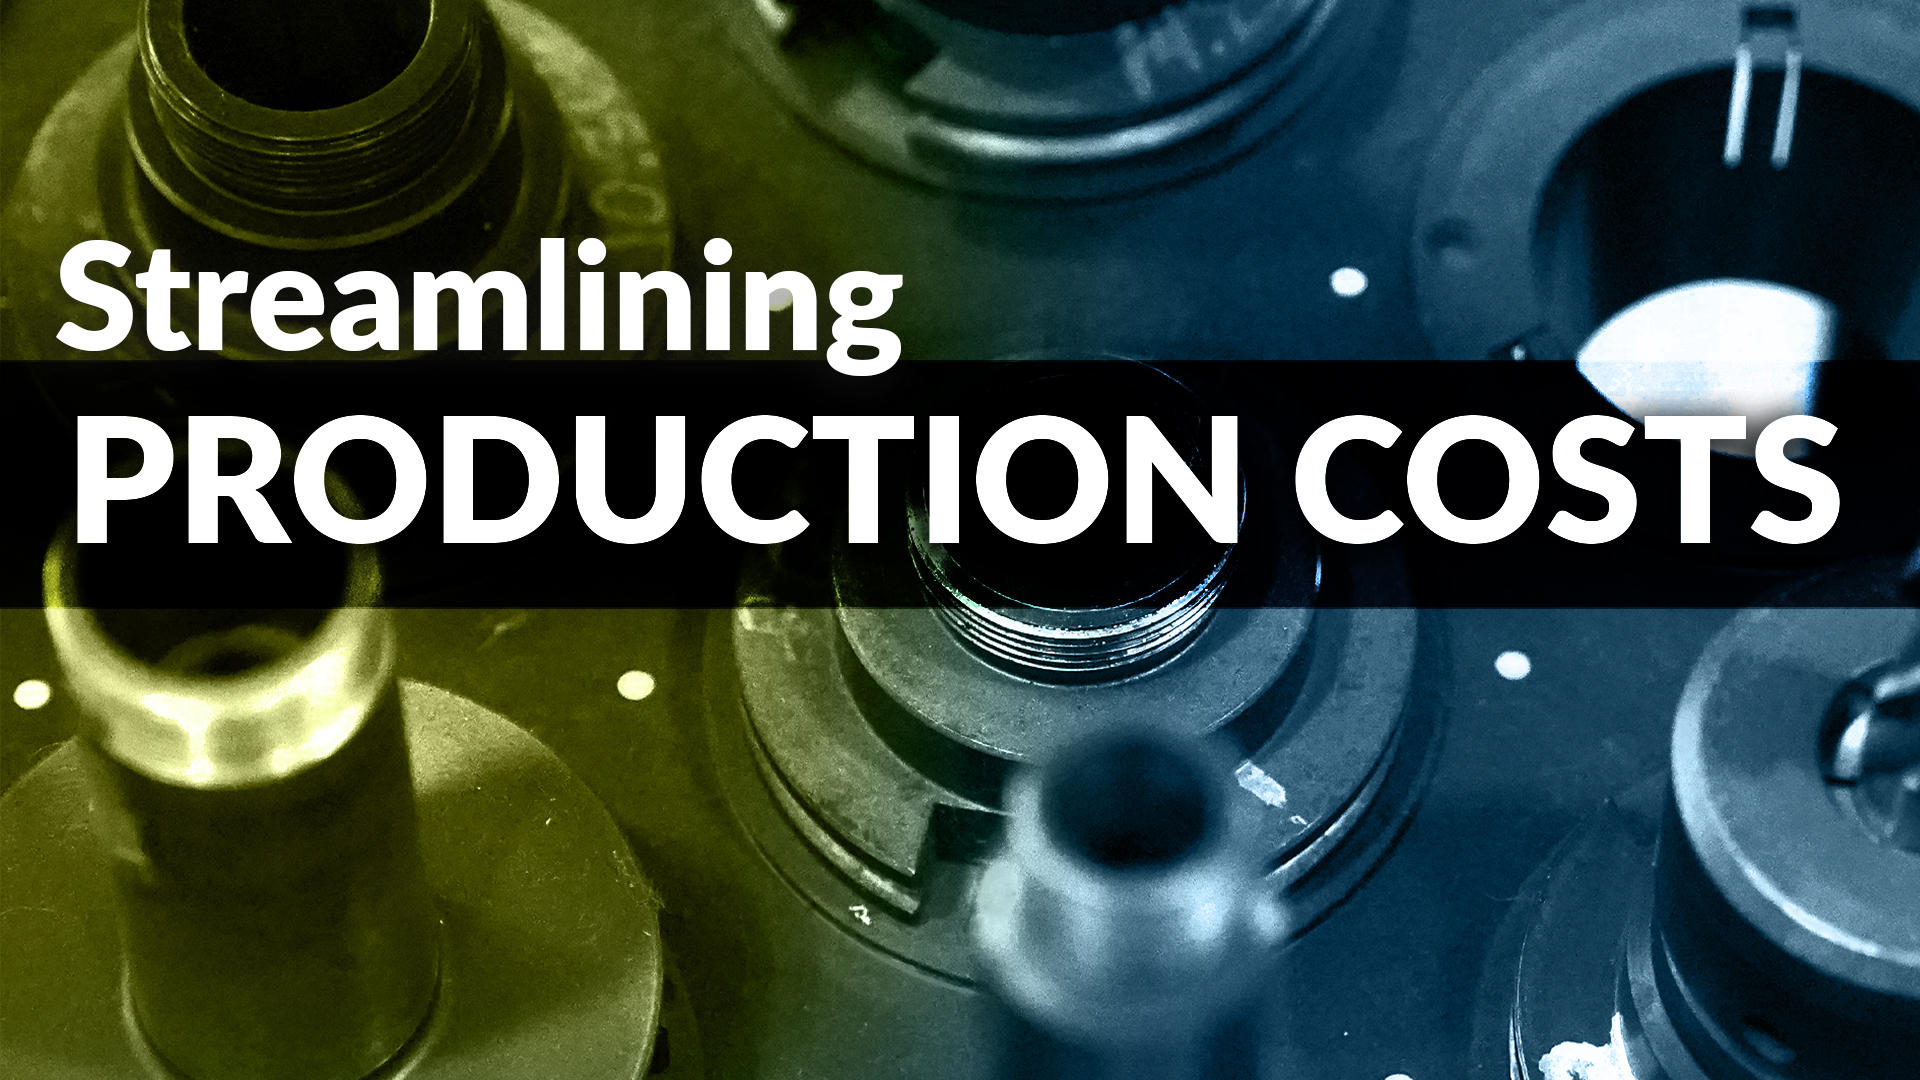 Streamlining Production Costs